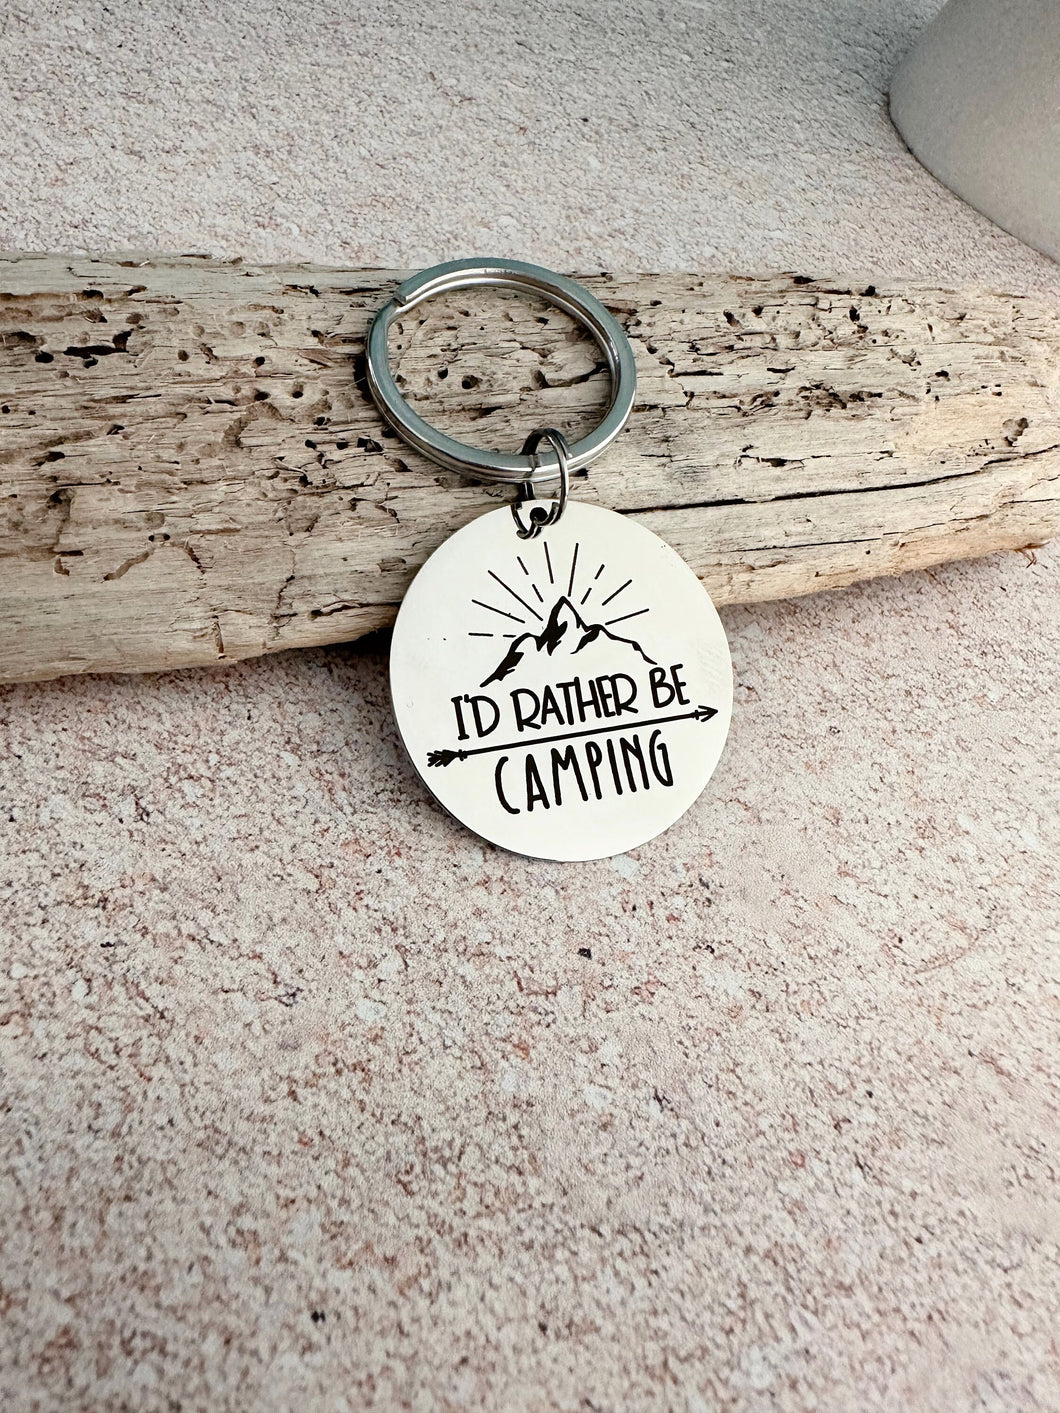 I'd rather be camping keychain - silver tone stainless steel engraved key ring - gift for friend - outdoor lovers mountain gift